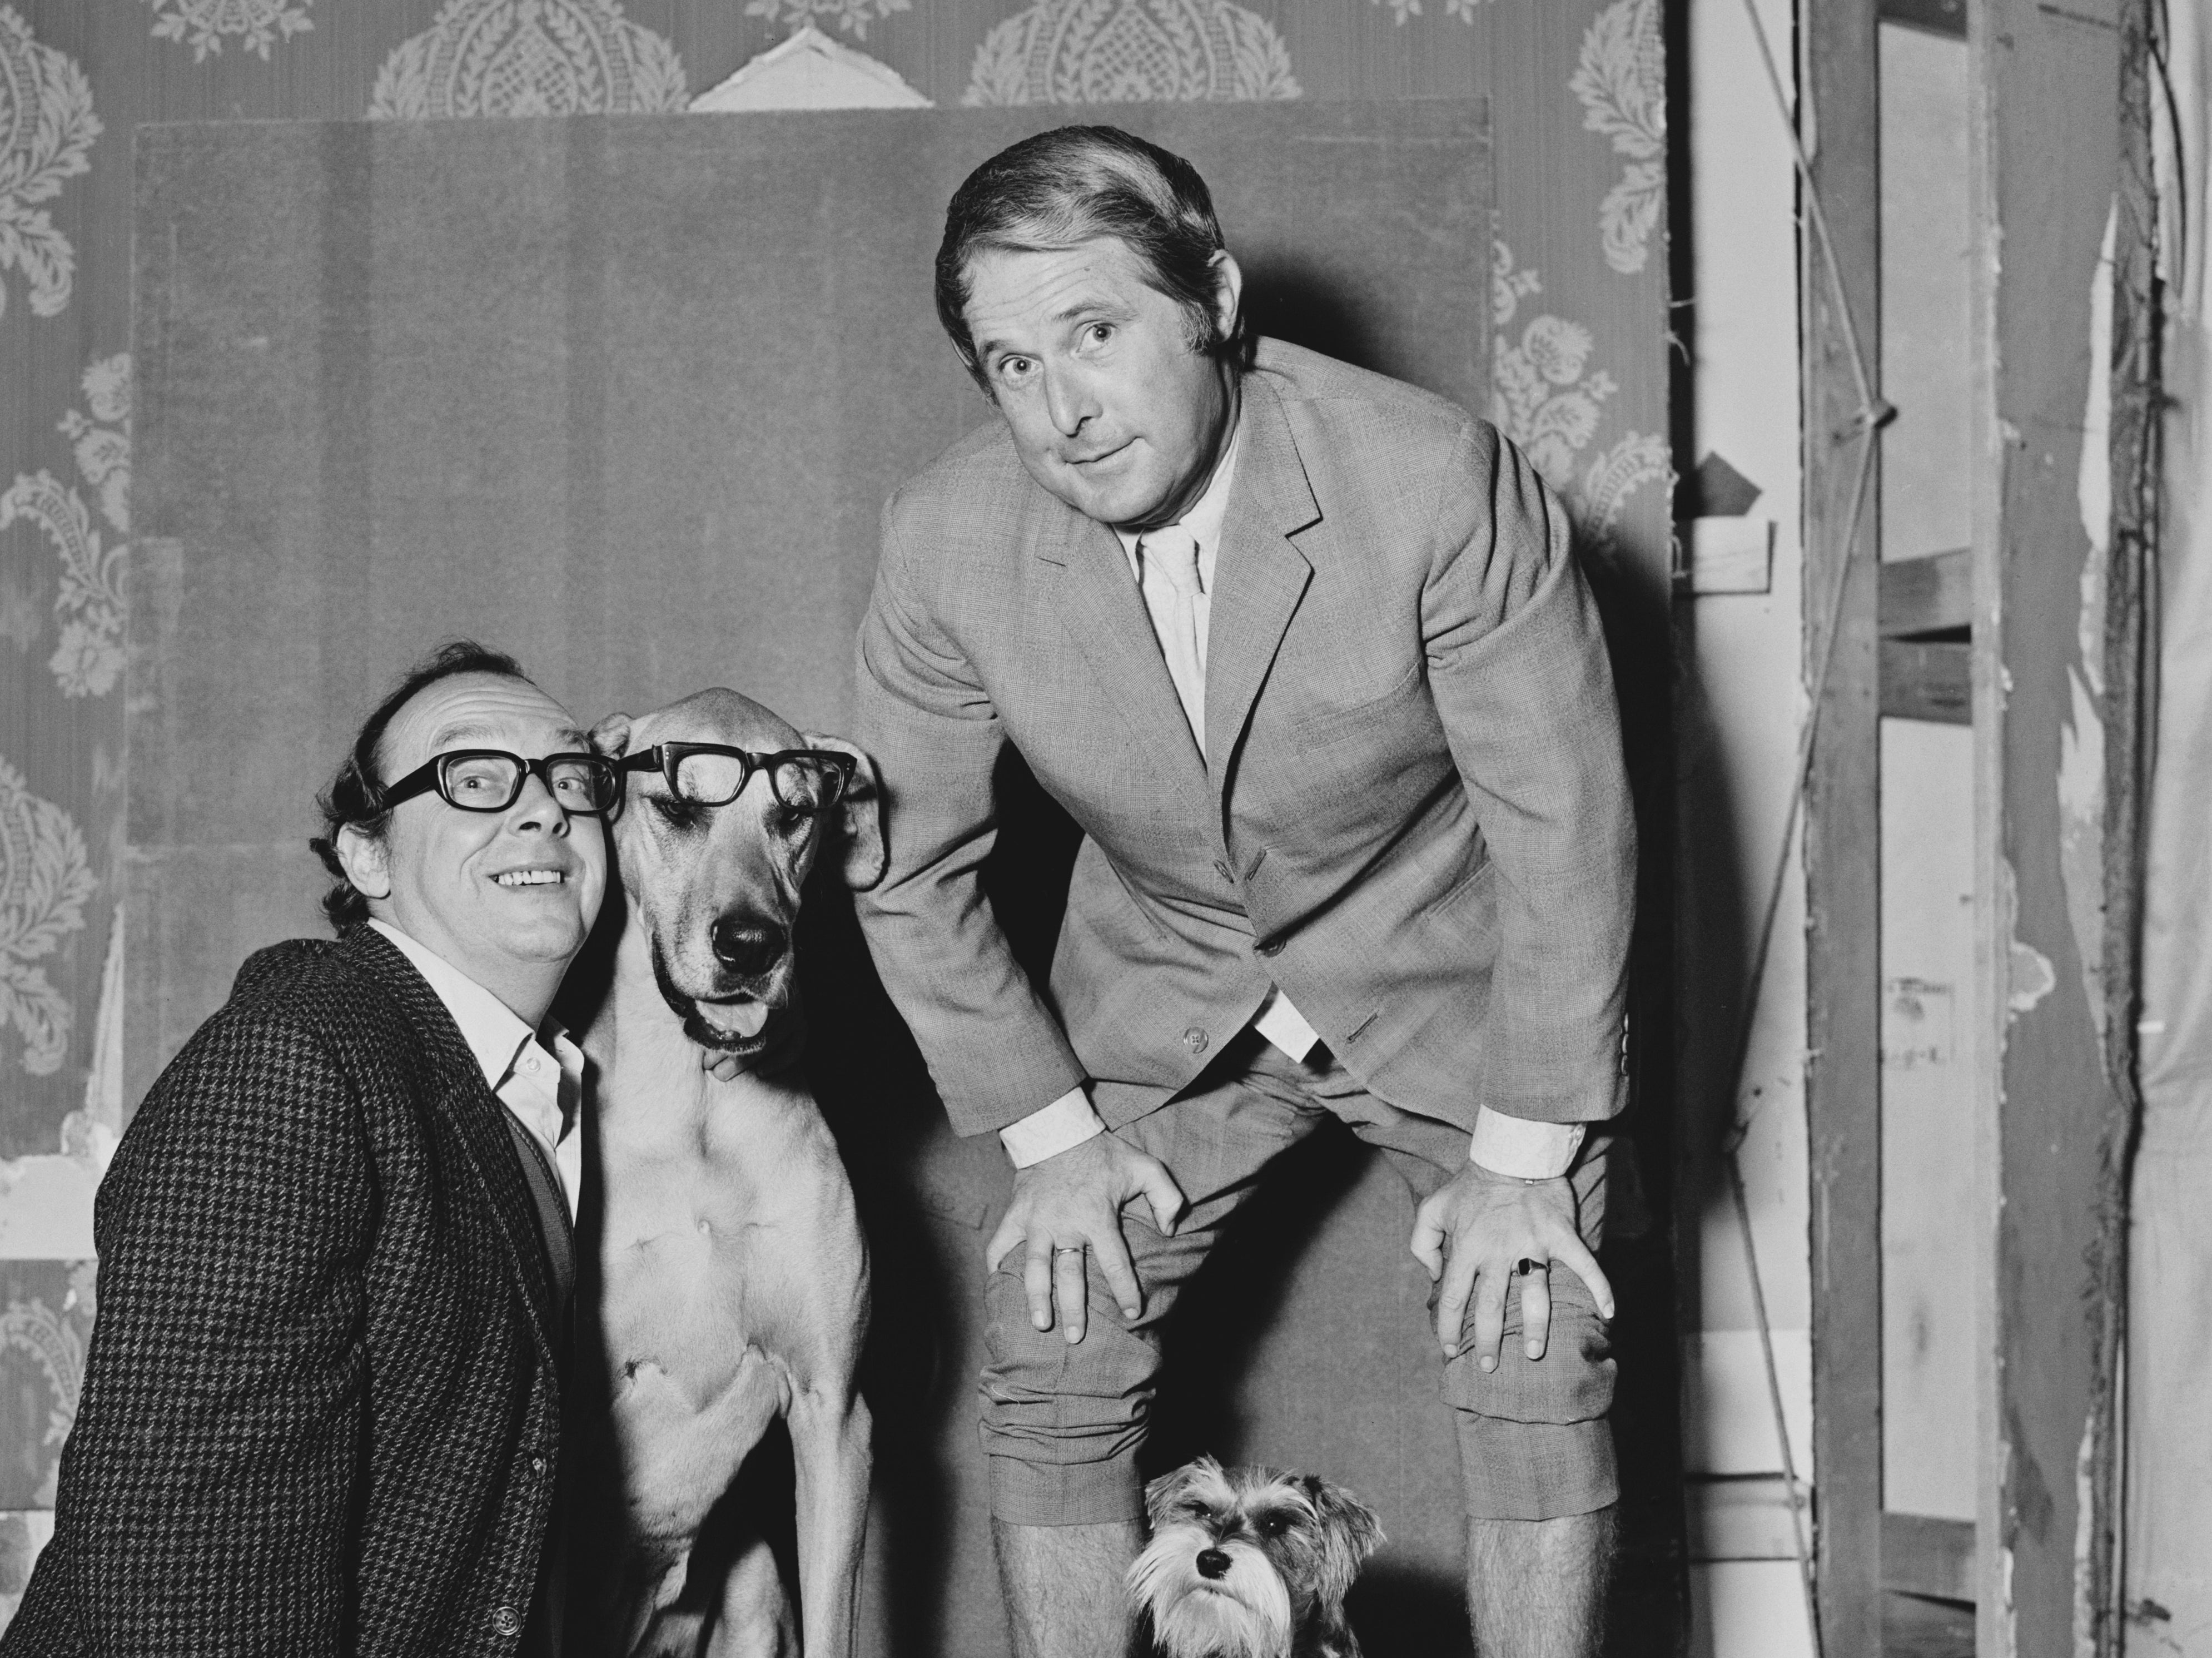 Morecambe and Wise during a sketch